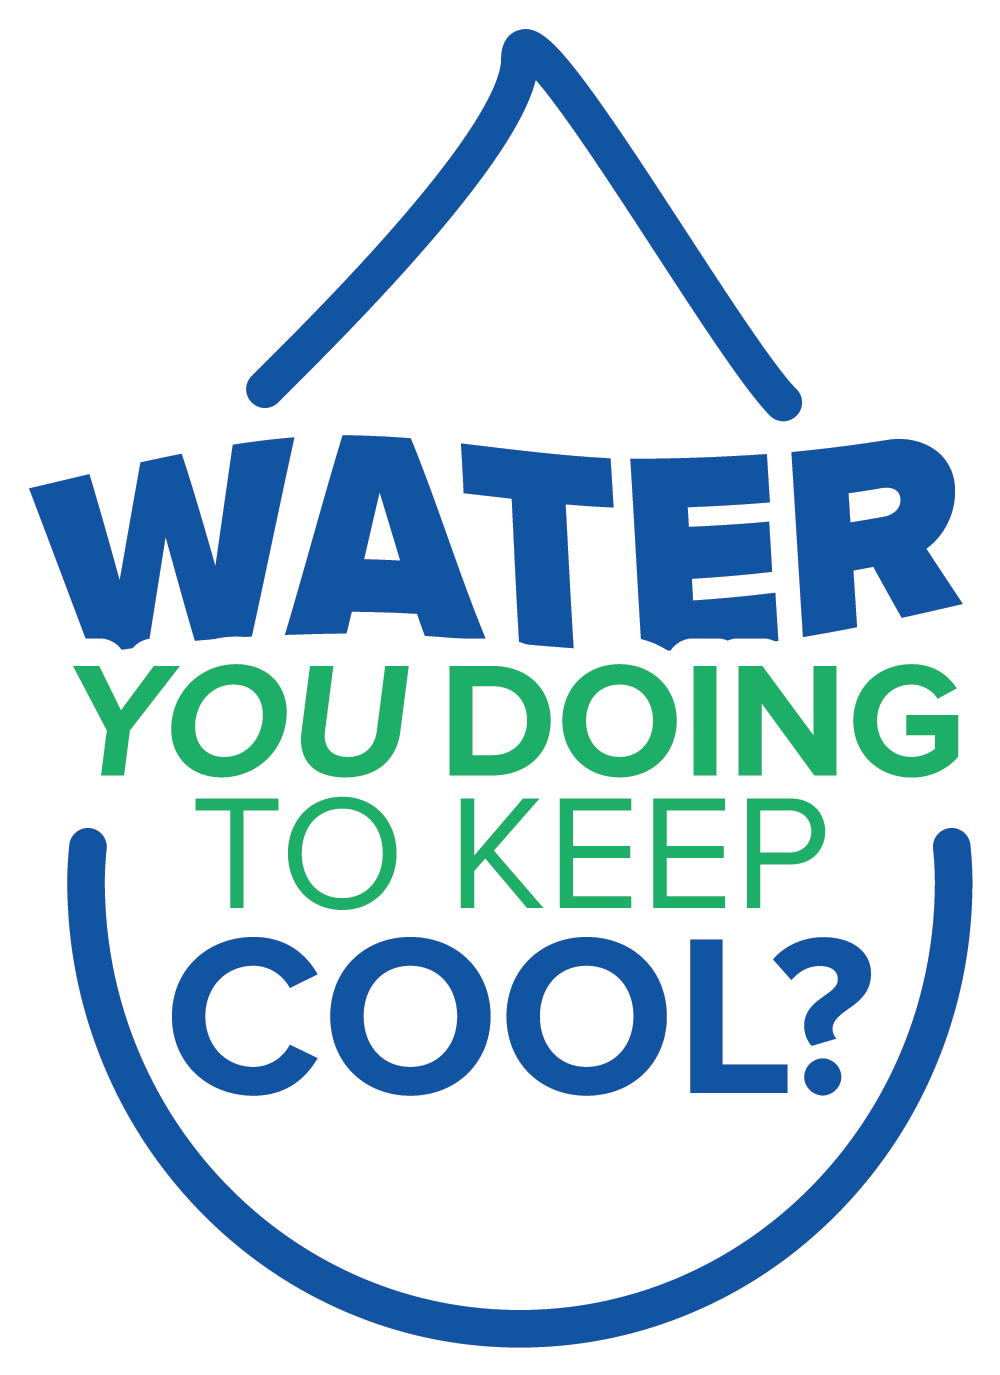 Download Water You Doing To Keep Cool Graphic Design Png Image With No Background Pngkey Com